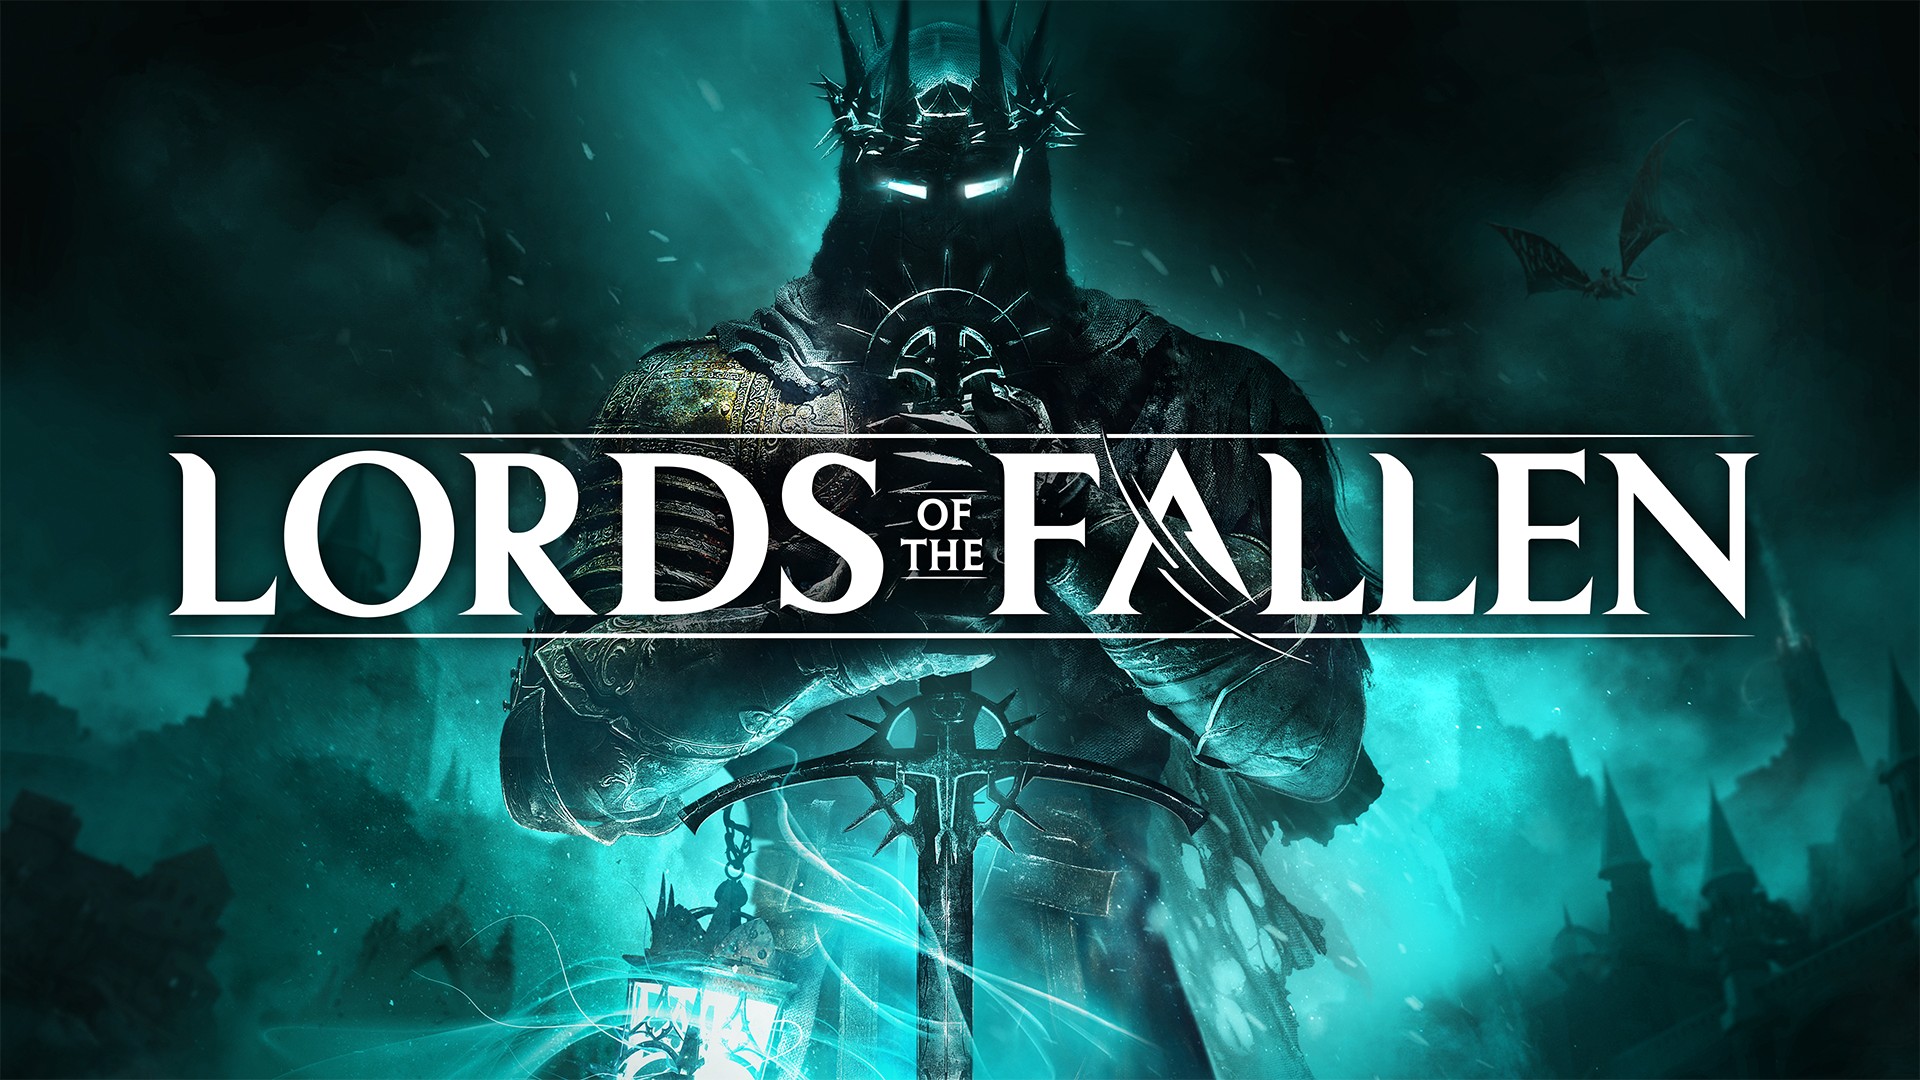 New Lords of the Fallen Update Improves Performance, Enemy AI & Co-Op